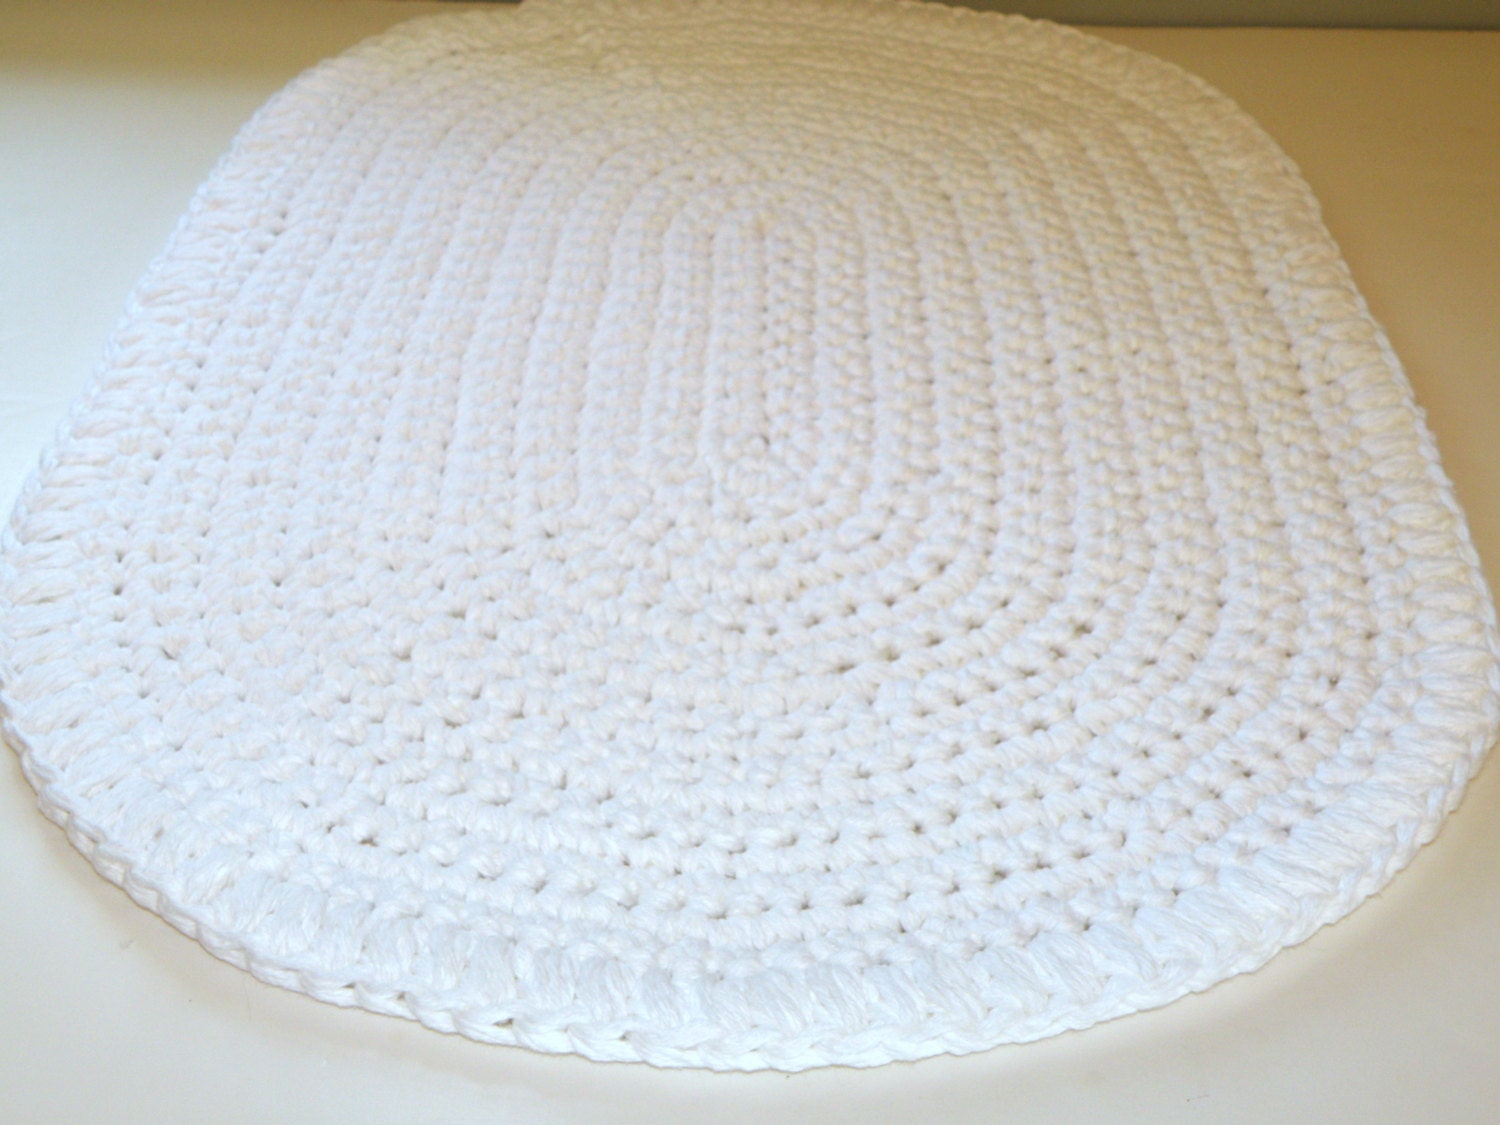 Thick White Bath Rug, White Cotton Bath Mat, Heavy Duty Crochet Cotton Oval Floor Rug, House Warming Gift Spa Collection - CottageCoveCrochet